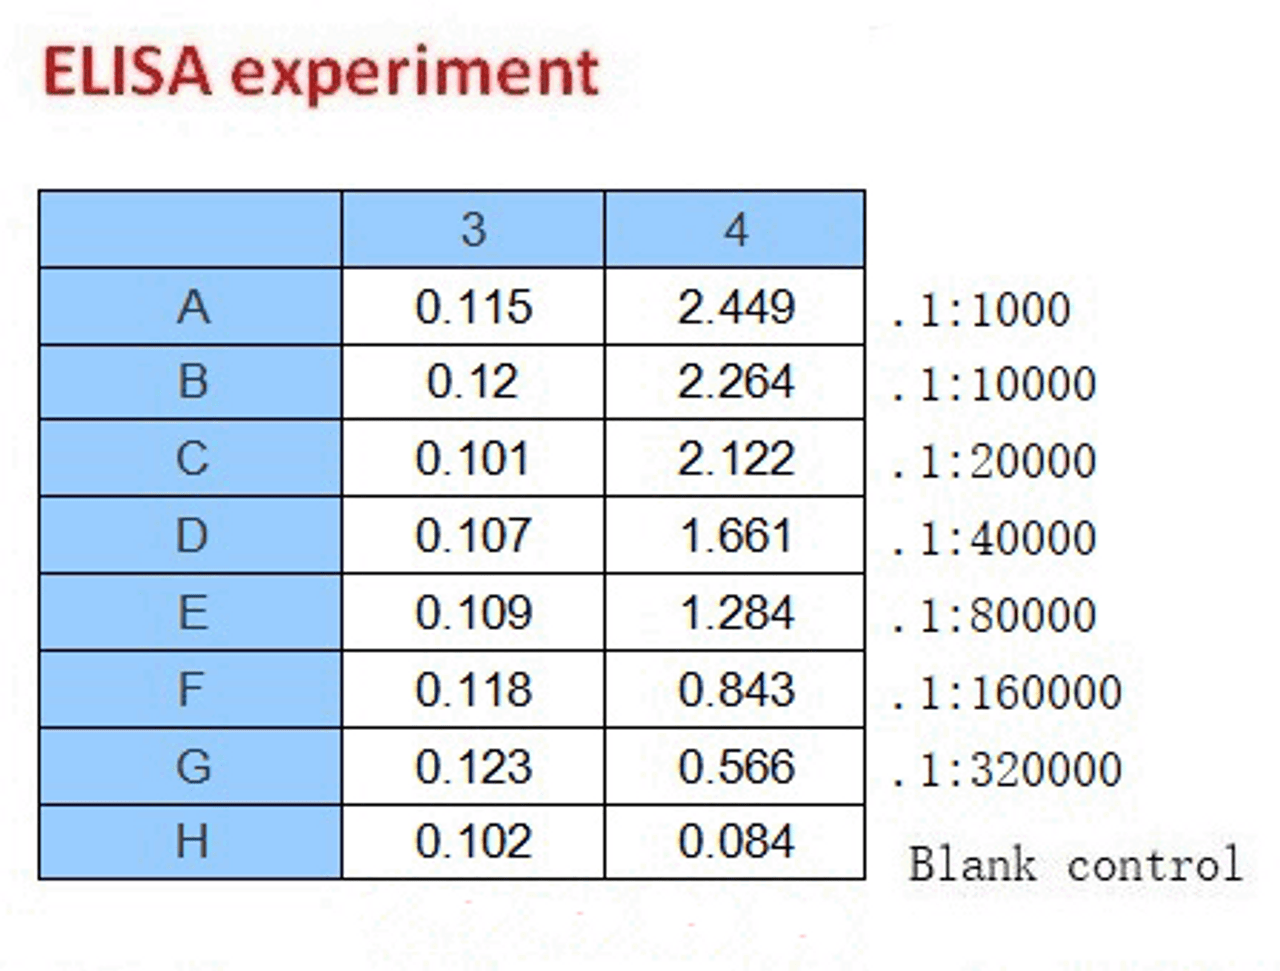 <strong>Figure 2 ELISA Test</strong><br>
Coating original concentration: 2 ug/mL, 100 uL/well samples are column 1: SARS-CoV-2 (COVID-19) Spike-RBD Recombinant Protein, 10-008, and column 2: SARS-CoV-2 (COVID-19) Spike-ECD Recombinant Protein, 10-011.<br>Antibodies: SARS-CoV-2 (COVID-19) Spike-ECD Monoclonal Antibody, 10-568.<br>Secondary: Goat anti-human IgG HRP conjugate at 1:10000 dilution.<br>Develop: 15min, 100 uL/well.<br>Stop: Stop buffer 50 uL/well.<br>10-568 doesn't react with 10-008.